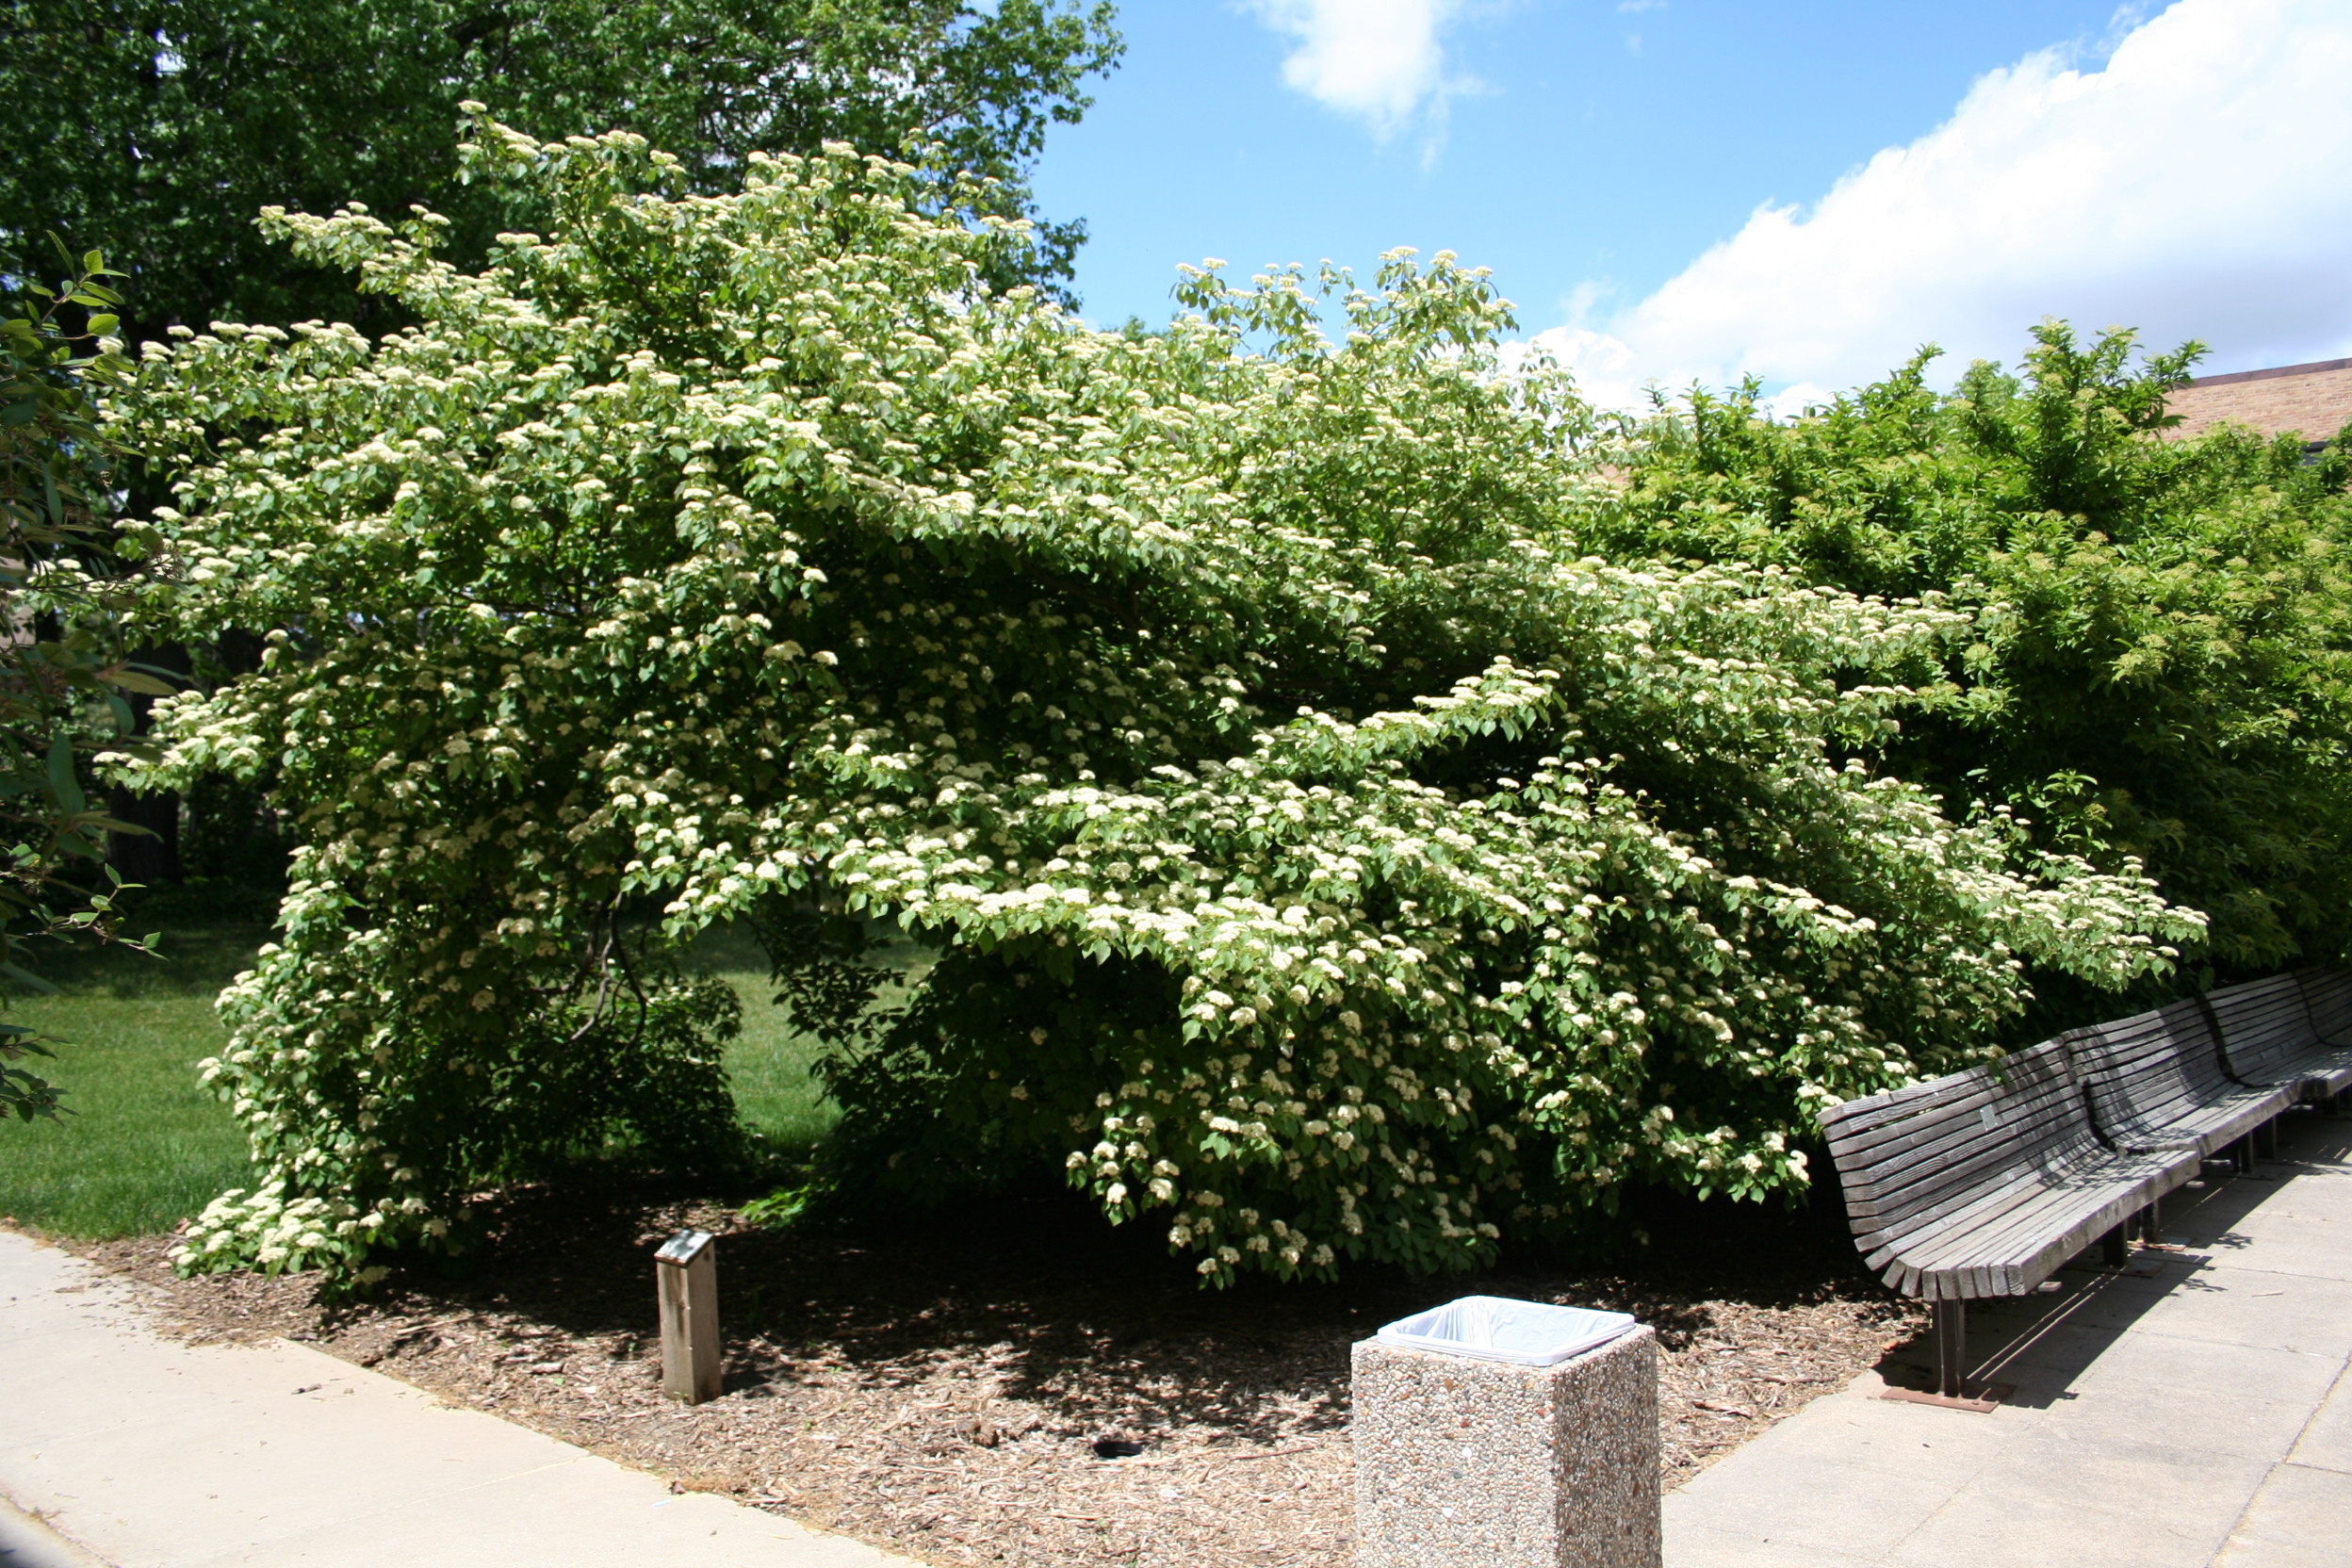 A row these shrubs while flowering adorn bench seating 